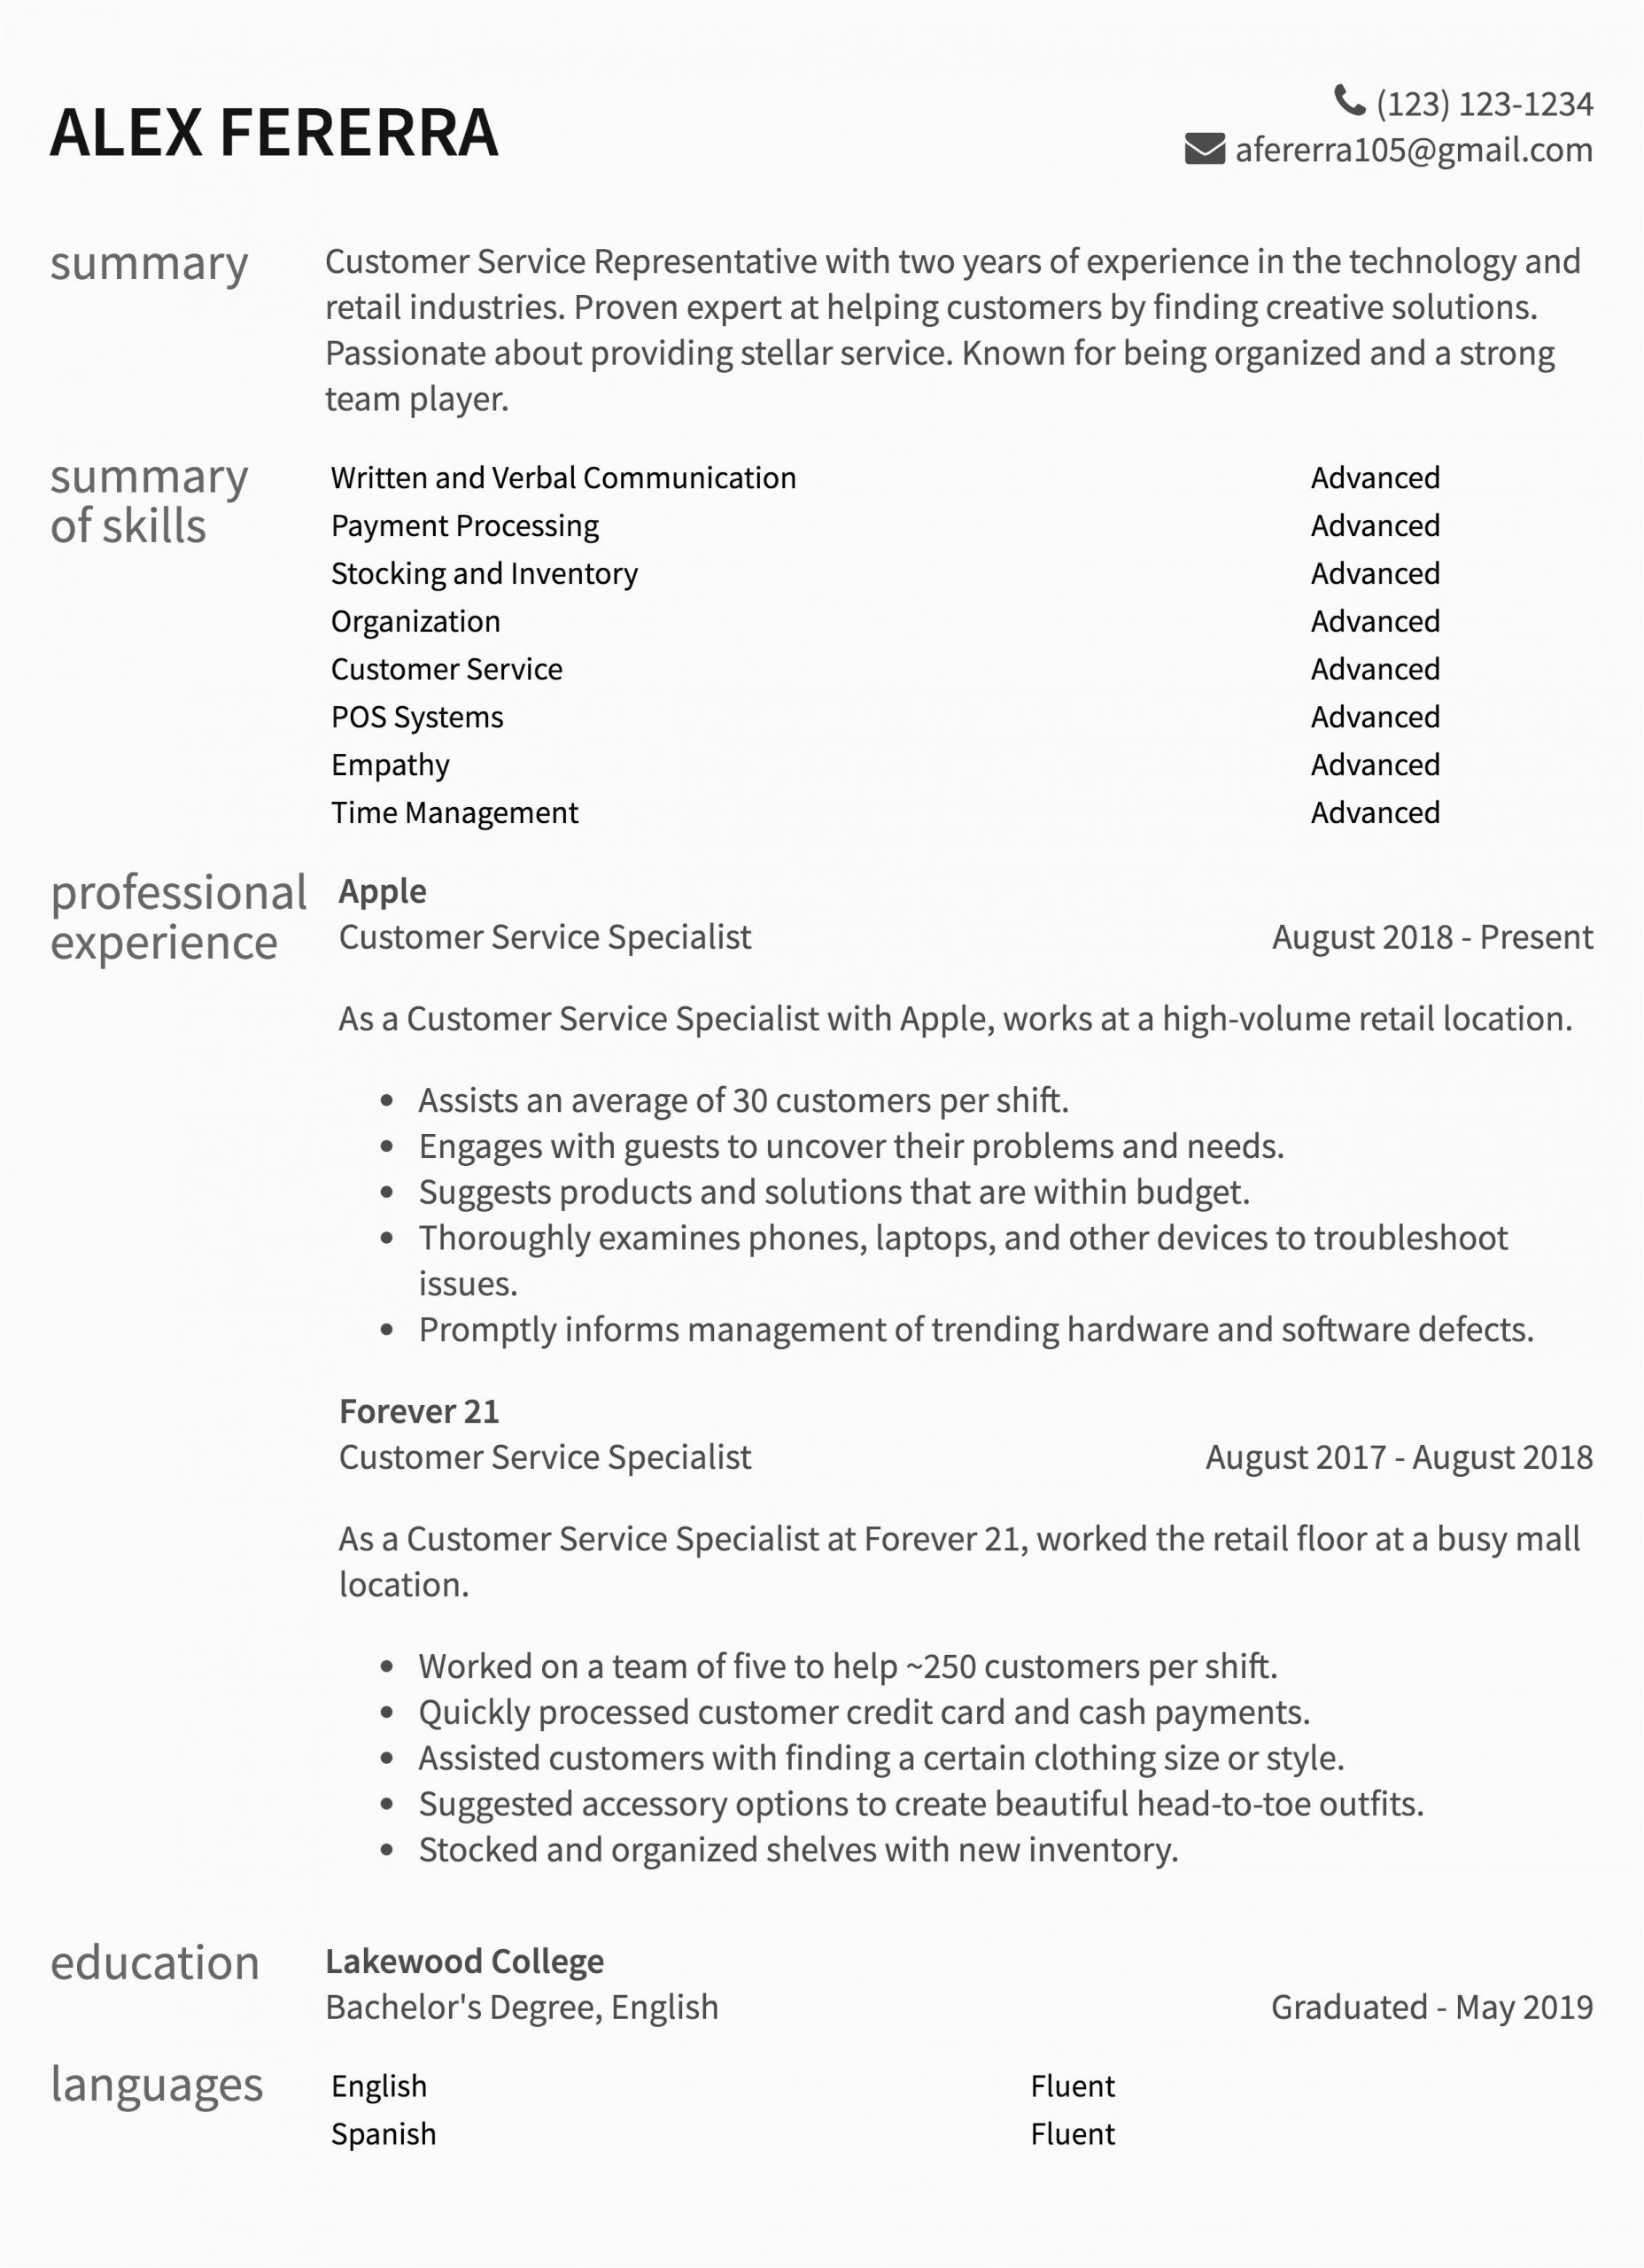 Resume Templates for Customer Service Position Customer Service Resume Samples & How to Guide